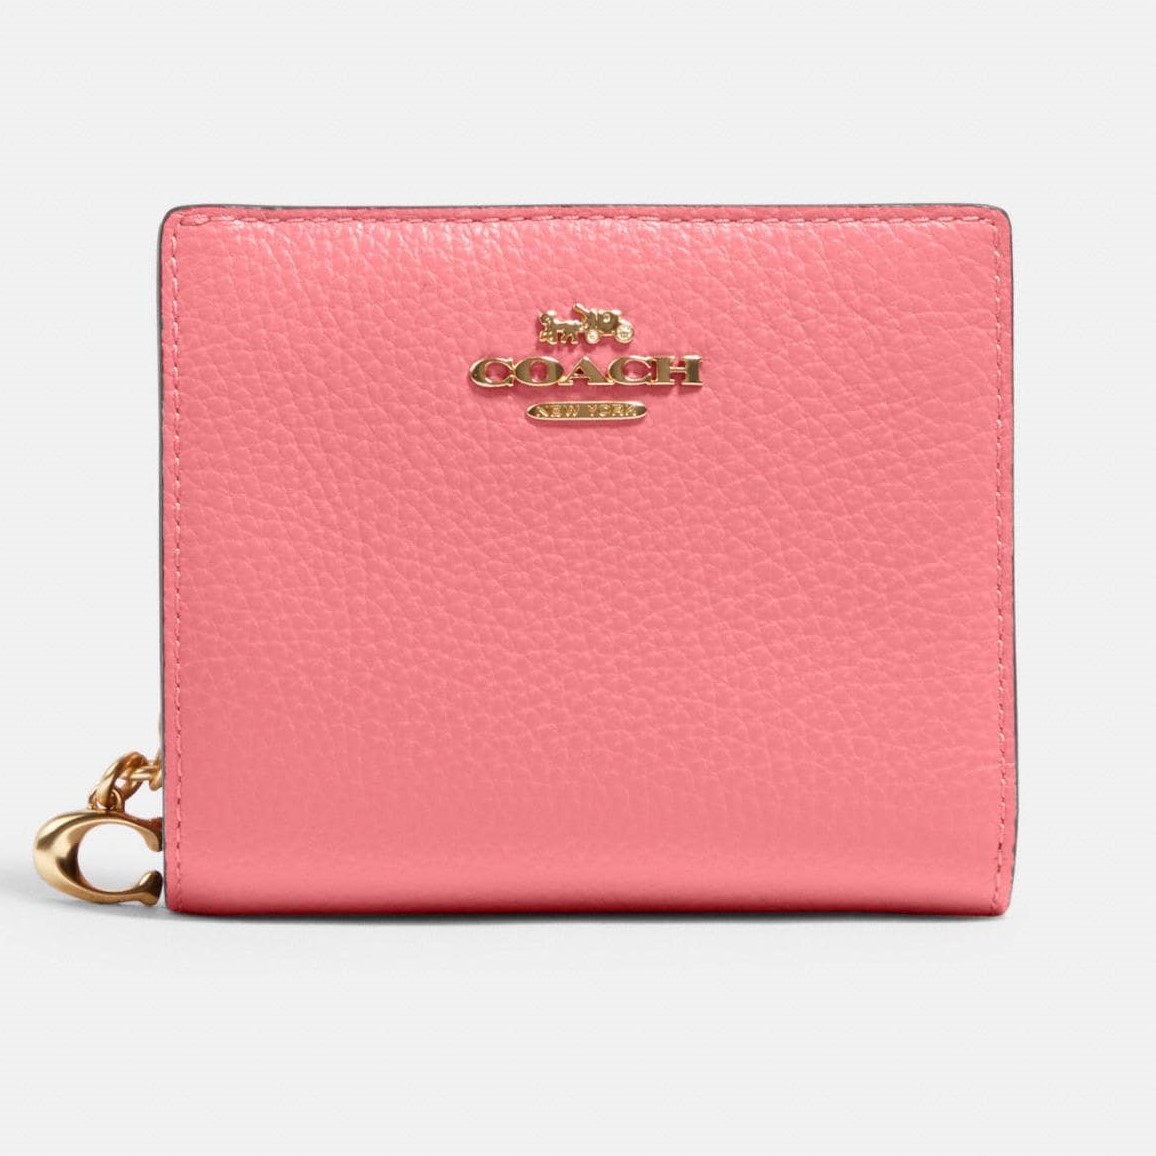 VÍ NGẮN COACH SMALL WALLET PEBBLE LEATHER SNAP WALLET 7